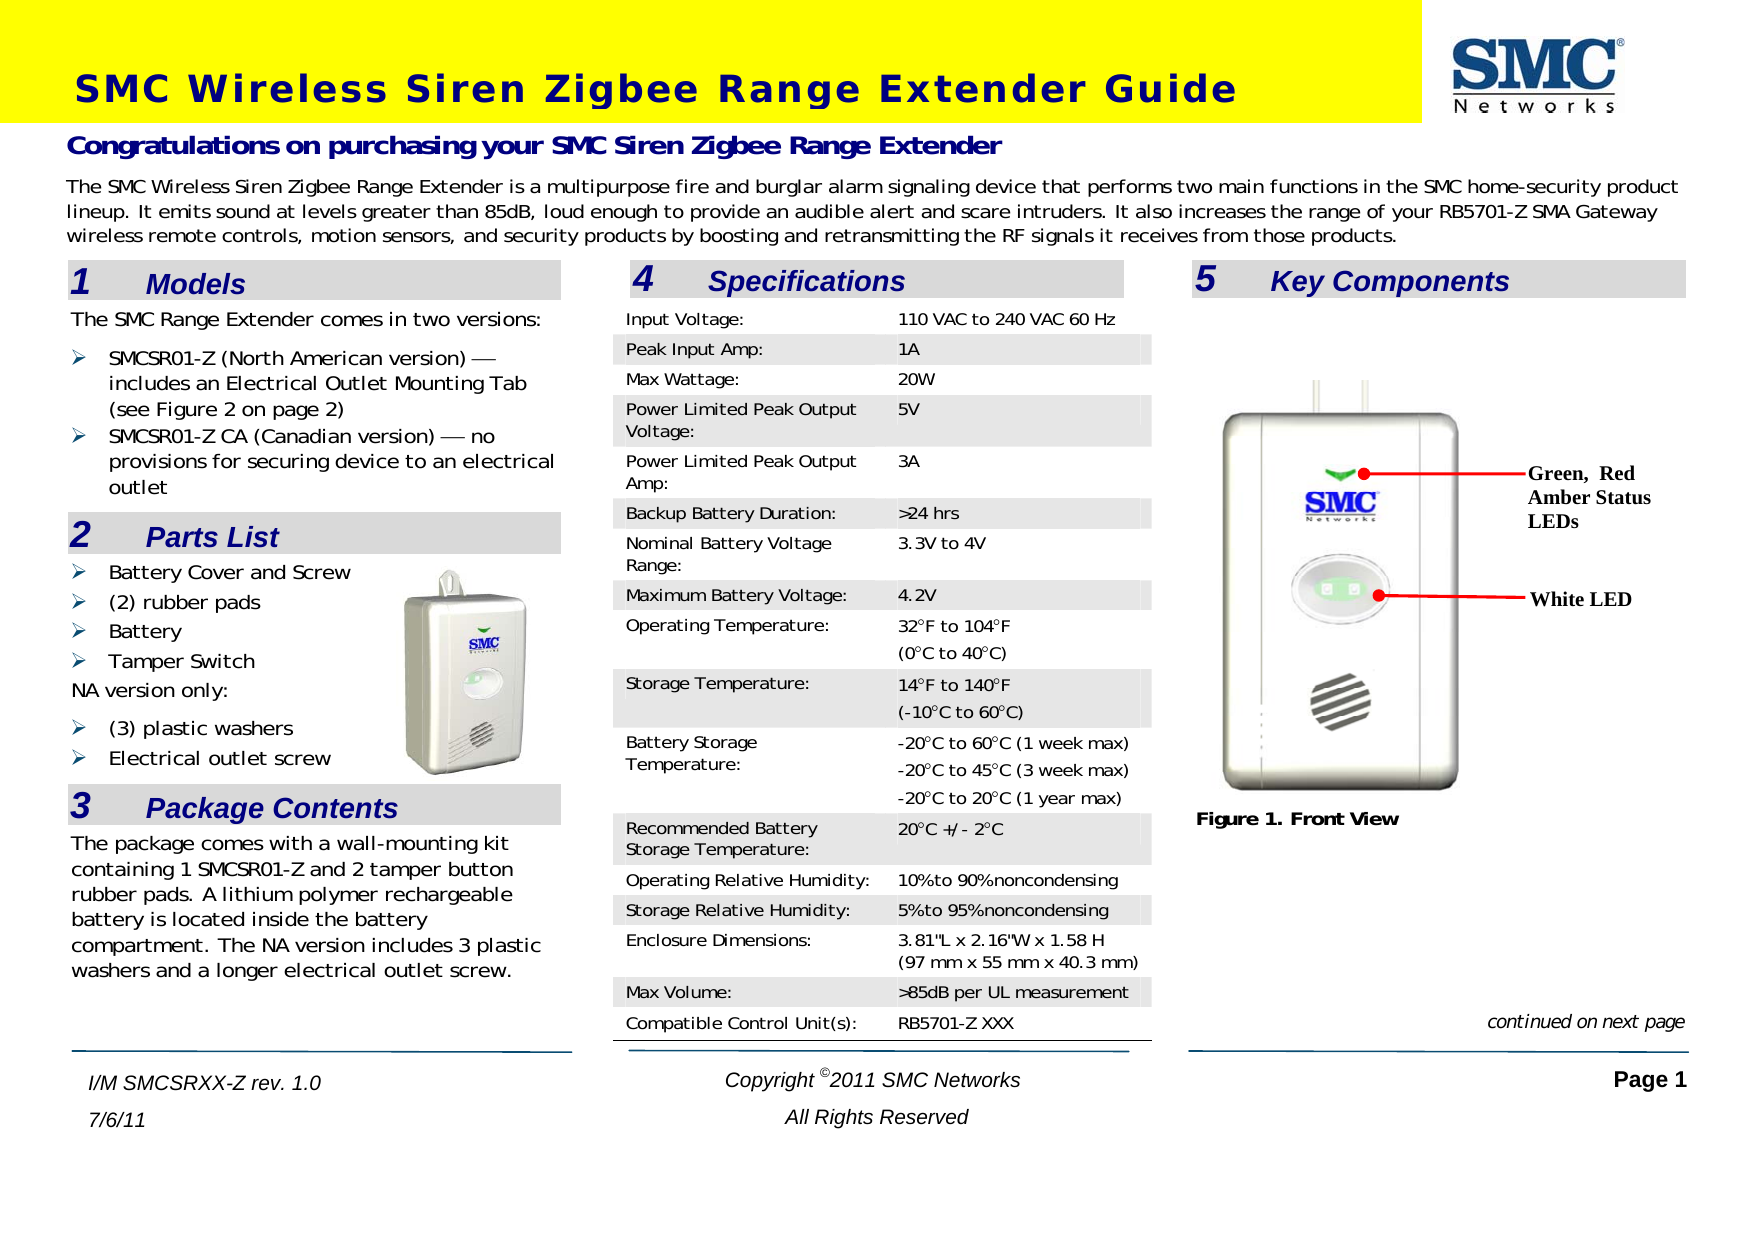  SMC Wireless Siren Zigbee Range Extender Guide  Copyright ©2011 SMC Networks   Page 1 All Rights Reserved  I/M SMCSRXX-Z rev. 1.0 7/6/11  1    Models The SMC Range Extender comes in two versions: ¾ SMCSR01-Z (North American version) ⎯ includes an Electrical Outlet Mounting Tab (see Figure 2 on page 2) ¾ SMCSR01-Z CA (Canadian version) ⎯ no provisions for securing device to an electrical outlet 2    Parts List ¾ Battery Cover and Screw ¾ (2) rubber pads ¾ Battery ¾ Tamper Switch NA version only: ¾ (3) plastic washers ¾ Electrical outlet screw 3    Package Contents The package comes with a wall-mounting kit containing 1 SMCSR01-Z and 2 tamper button rubber pads. A lithium polymer rechargeable battery is located inside the battery compartment. The NA version includes 3 plastic washers and a longer electrical outlet screw.    4    Specifications Input Voltage:  110 VAC to 240 VAC 60 Hz Peak Input Amp:  1A Max Wattage:  20W Power Limited Peak Output Voltage:  5V Power Limited Peak Output Amp:  3A Backup Battery Duration:  &gt;24 hrs Nominal Battery Voltage Range:  3.3V to 4V Maximum Battery Voltage:  4.2V Operating Temperature:  32°F to 104°F (0°C to 40°C) Storage Temperature:  14°F to 140°F  (-10°C to 60°C) Battery Storage Temperature:  -20°C to 60°C (1 week max)  -20°C to 45°C (3 week max)  -20°C to 20°C (1 year max)  Recommended Battery Storage Temperature:  20°C +/- 2°C Operating Relative Humidity:  10% to 90% noncondensing Storage Relative Humidity:  5% to 95% noncondensing Enclosure Dimensions:  3.81&quot;L x 2.16&quot;W x 1.58 H (97 mm x 55 mm x 40.3 mm) Max Volume:  &gt;85dB per UL measurement Compatible Control Unit(s):  RB5701-Z XXX  5    Key Components Congratulations on purchasing your SMC Siren Zigbee Range Extender The SMC Wireless Siren Zigbee Range Extender is a multipurpose fire and burglar alarm signaling device that performs two main functions in the SMC home-security product lineup. It emits sound at levels greater than 85dB, loud enough to provide an audible alert and scare intruders. It also increases the range of your RB5701-Z SMA Gateway wireless remote controls, motion sensors, and security products by boosting and retransmitting the RF signals it receives from those products.    Green,  Red Amber Status LEDs White LED Figure 1. Front View continued on next page